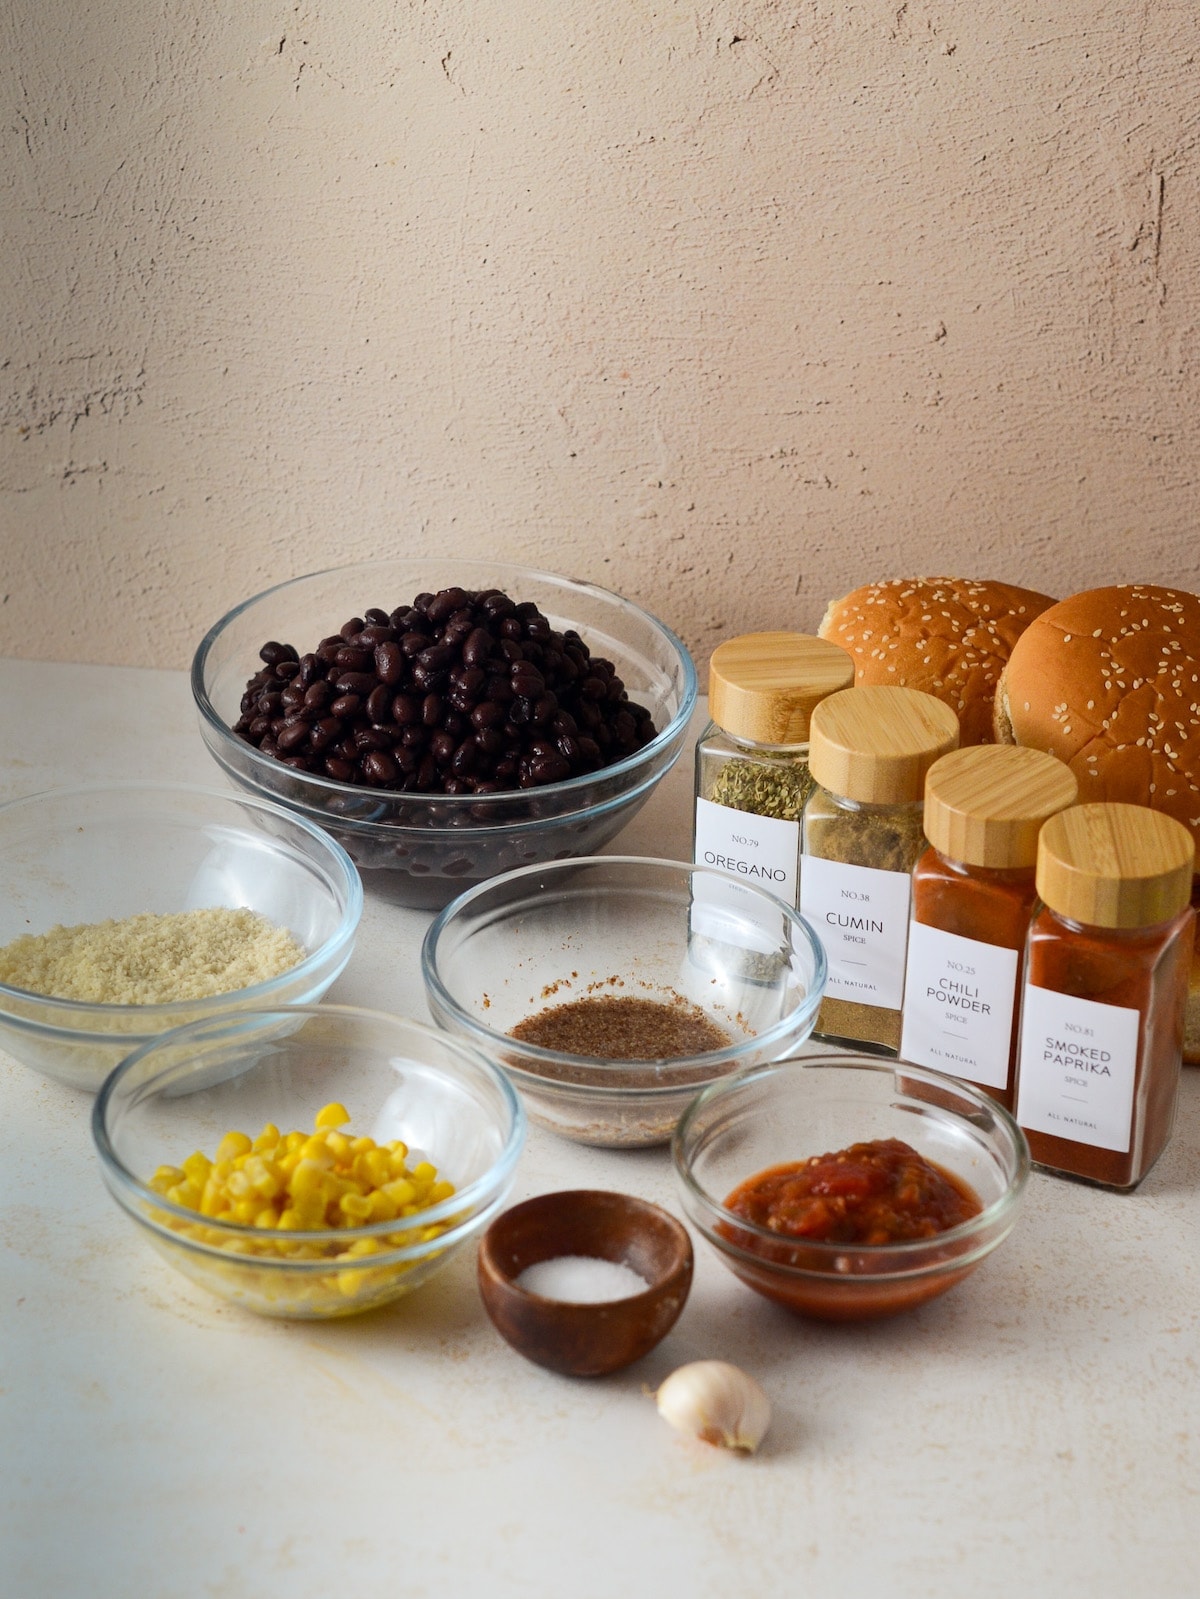 This is a photo of the ingredients for southwest burgers.